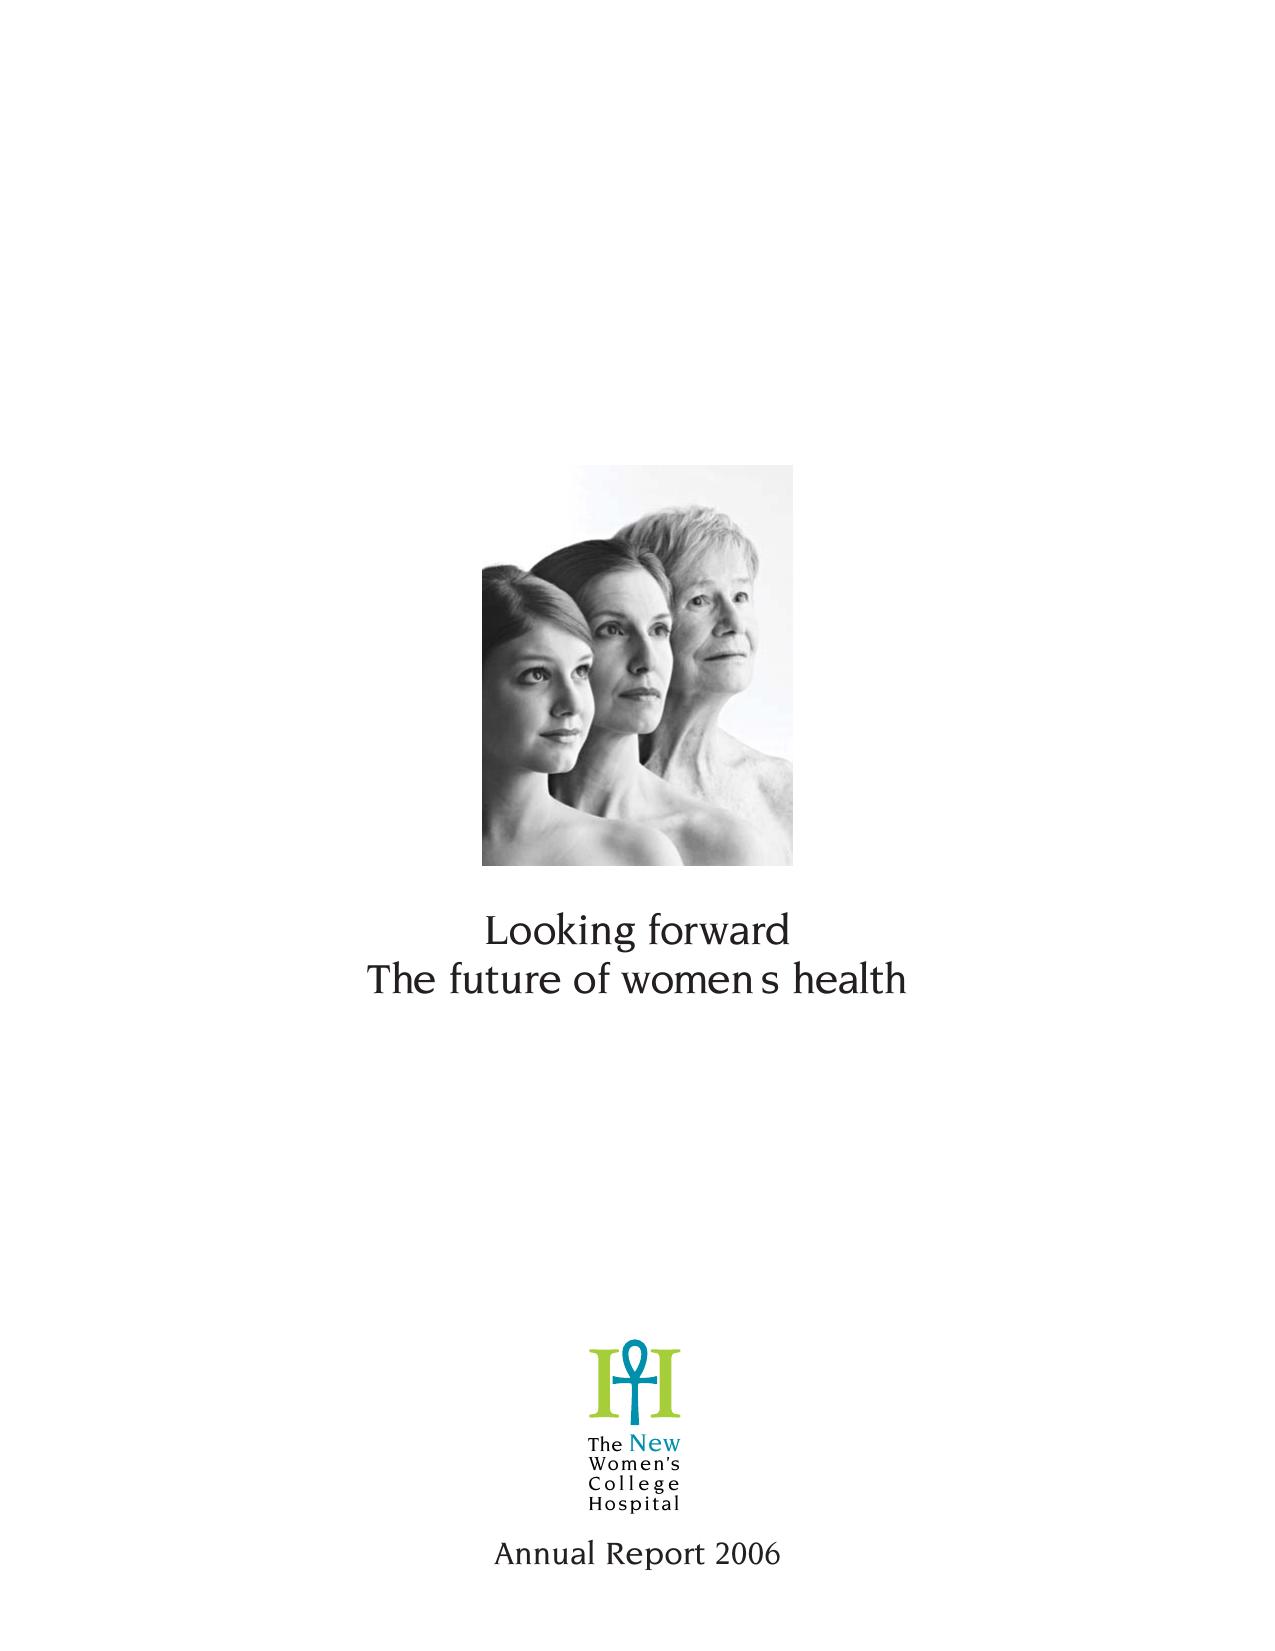 WOMENSCOLLEGEHOSPITAL 2022 Annual Report